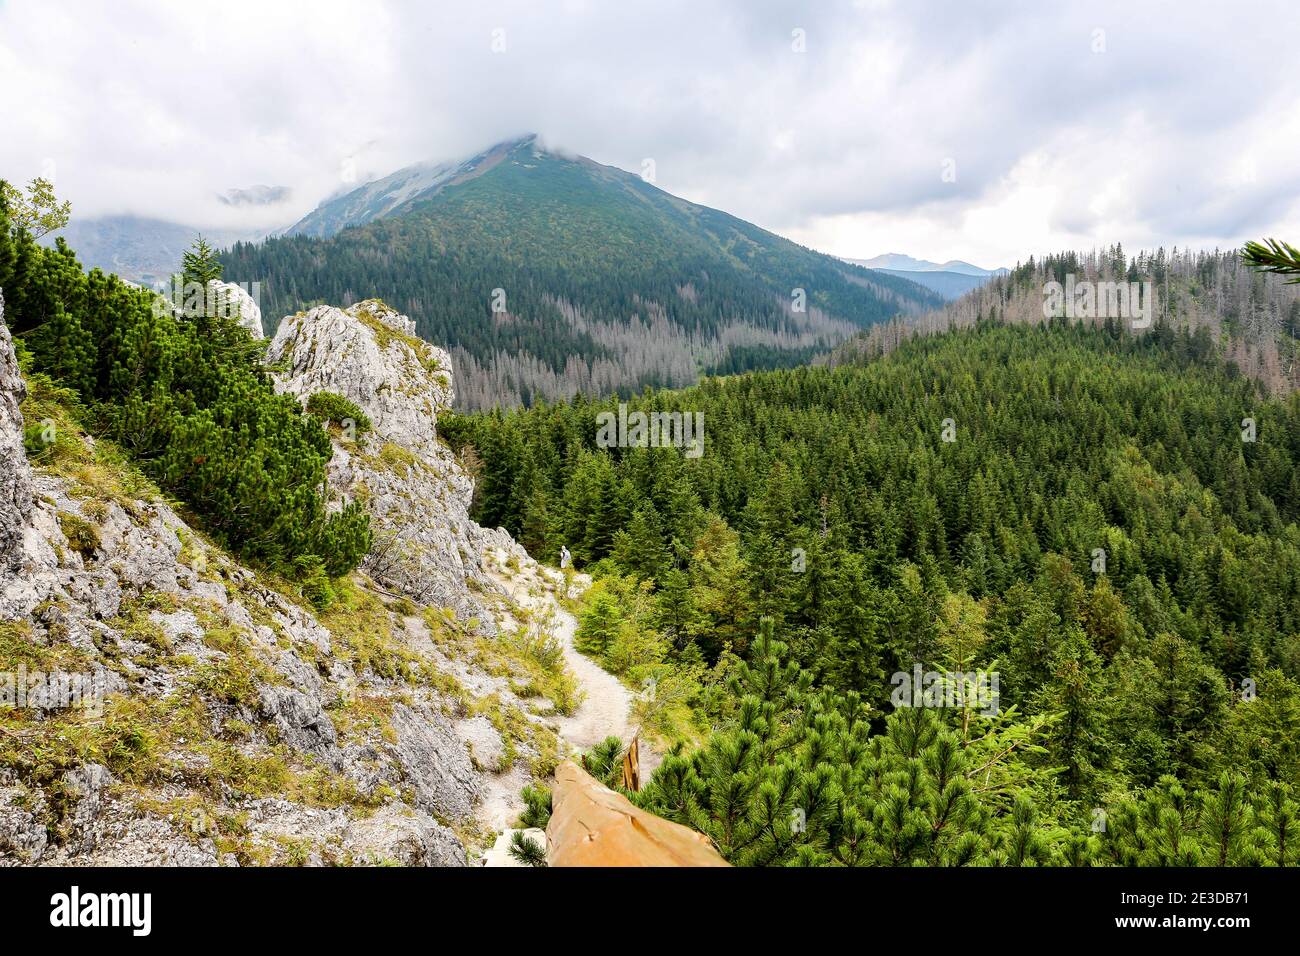 Coniferous forest with mountain pine and spruces on rocky Gesia Szyja Mount in Tatra Mountains, with Tatra Mountains in the background. Stock Photo